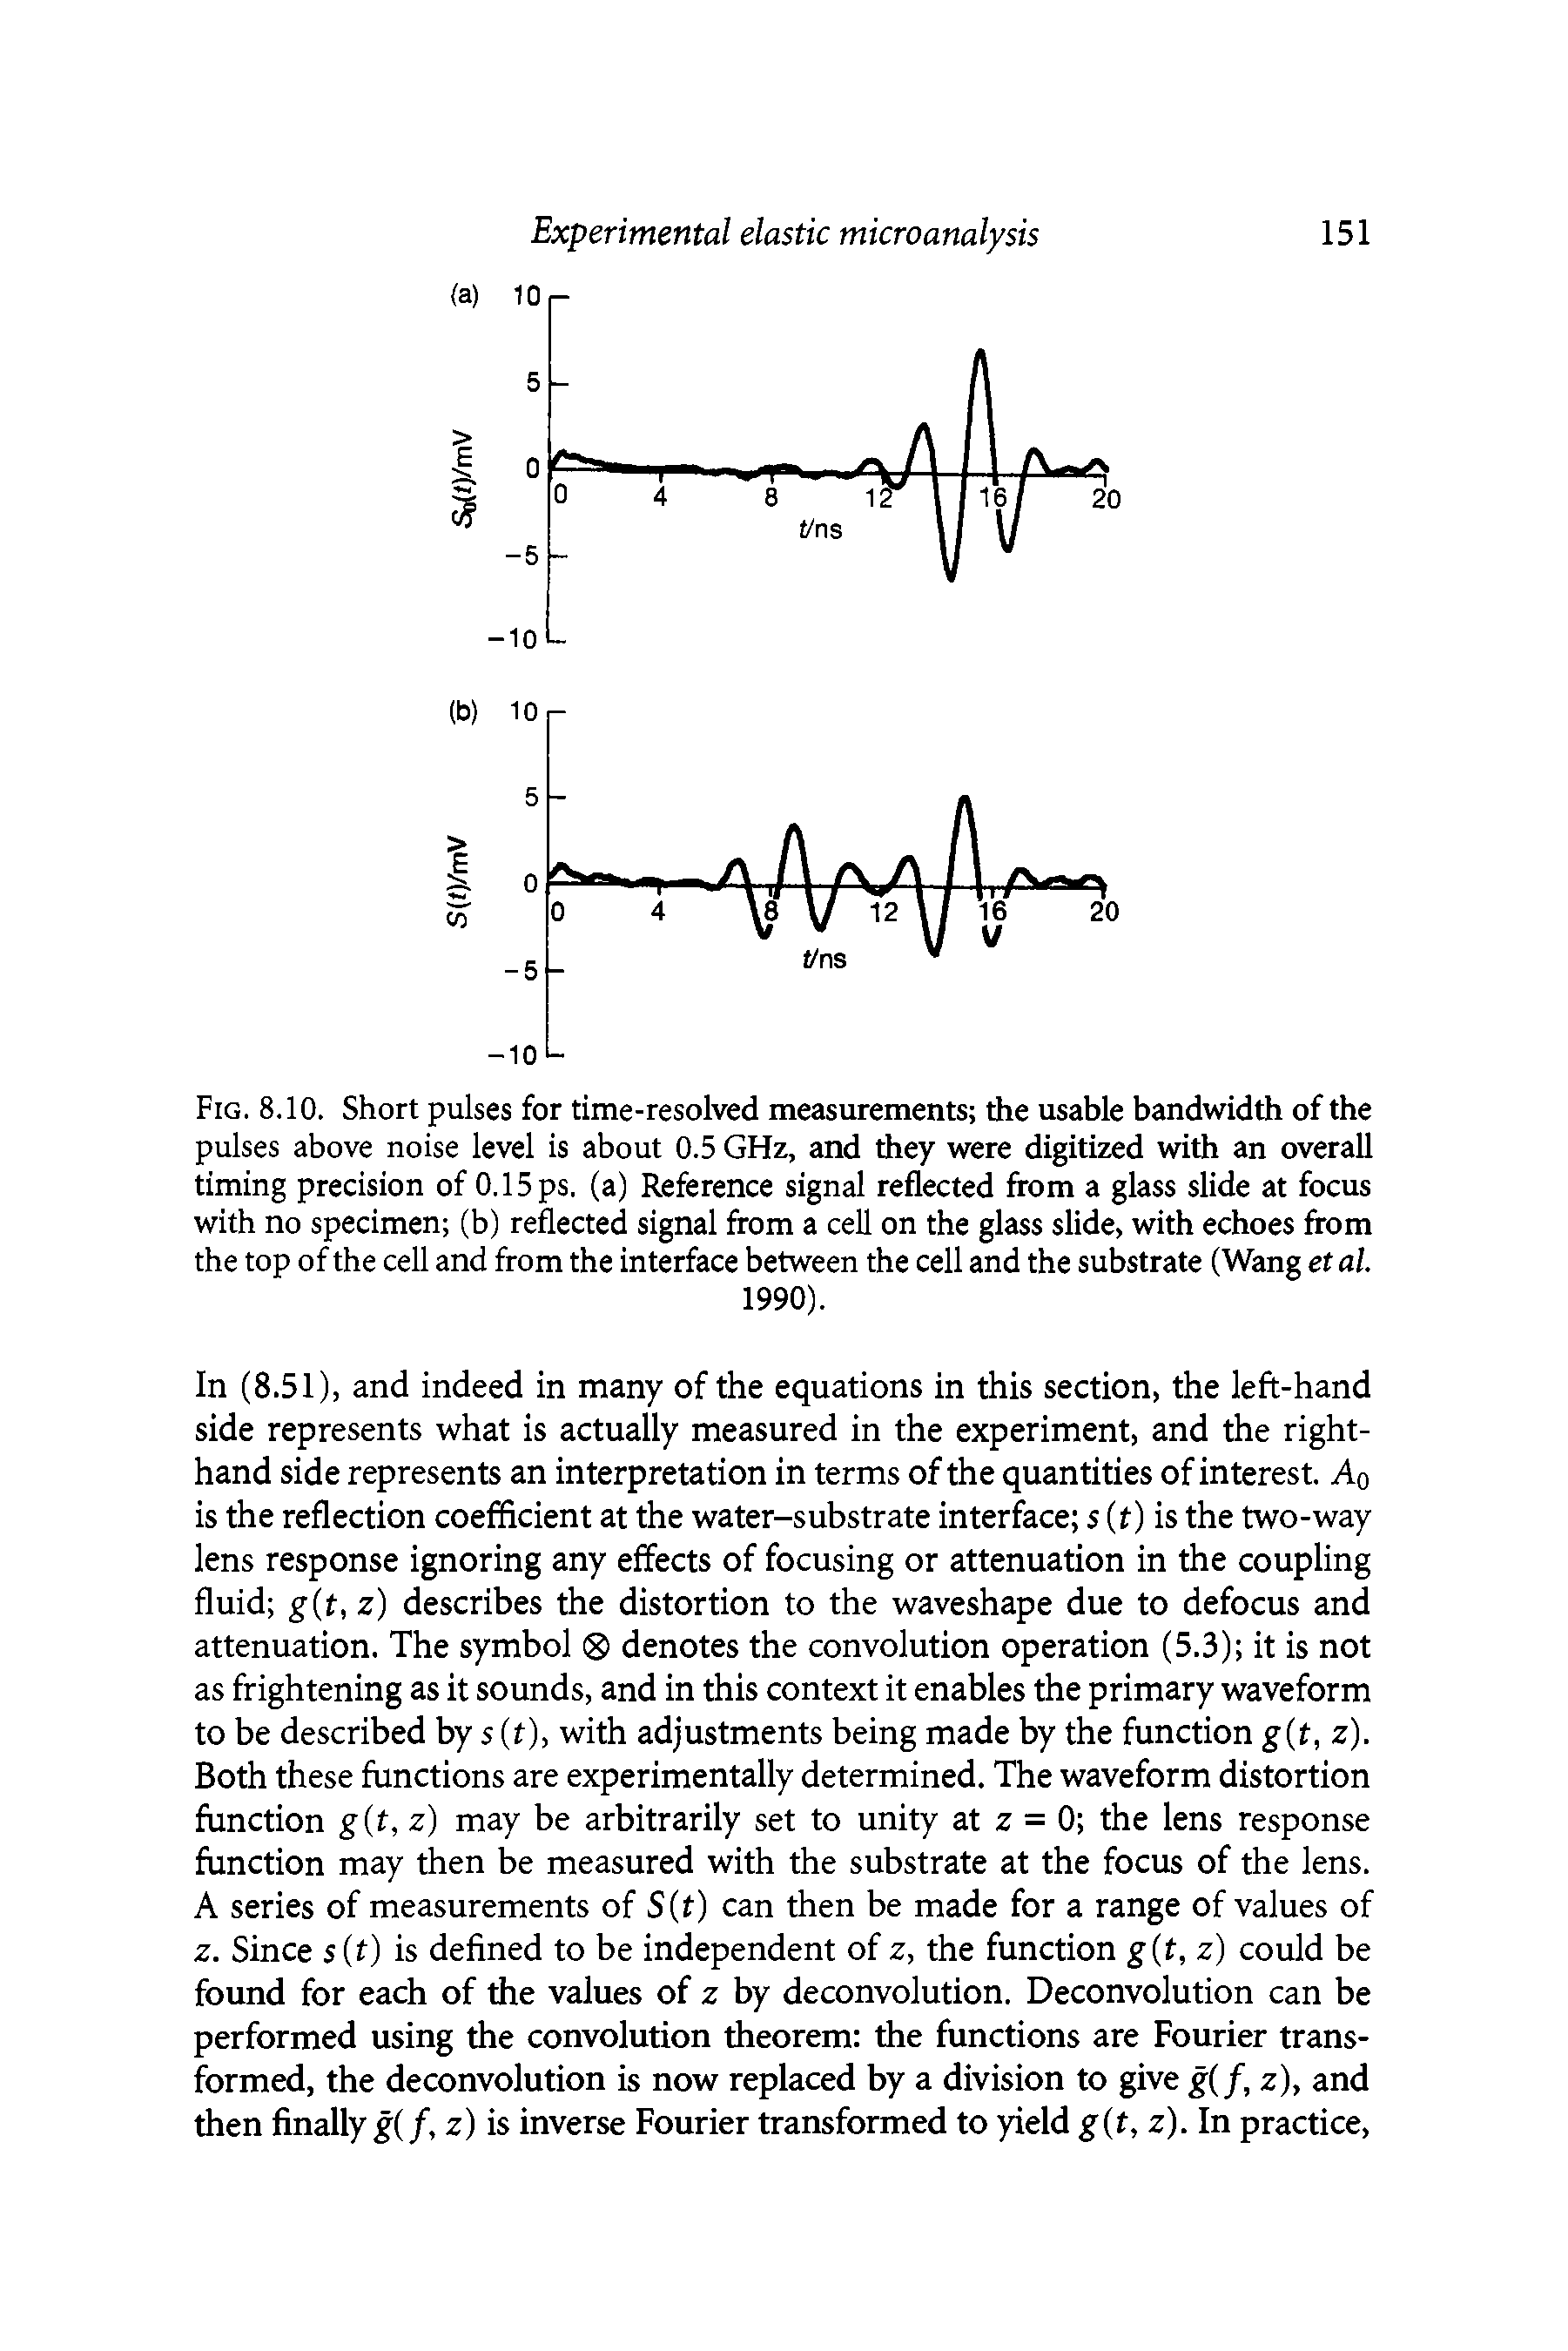 Fig. 8.10. Short pulses for time-resolved measurements the usable bandwidth of the pulses above noise level is about 0.5 GHz, and they were digitized with an overall timing precision of 0.15ps. (a) Reference signal reflected from a glass slide at focus with no specimen (b) reflected signal from a cell on the glass slide, with echoes from the top of the cell and from the interface between the cell and the substrate (Wang et al.